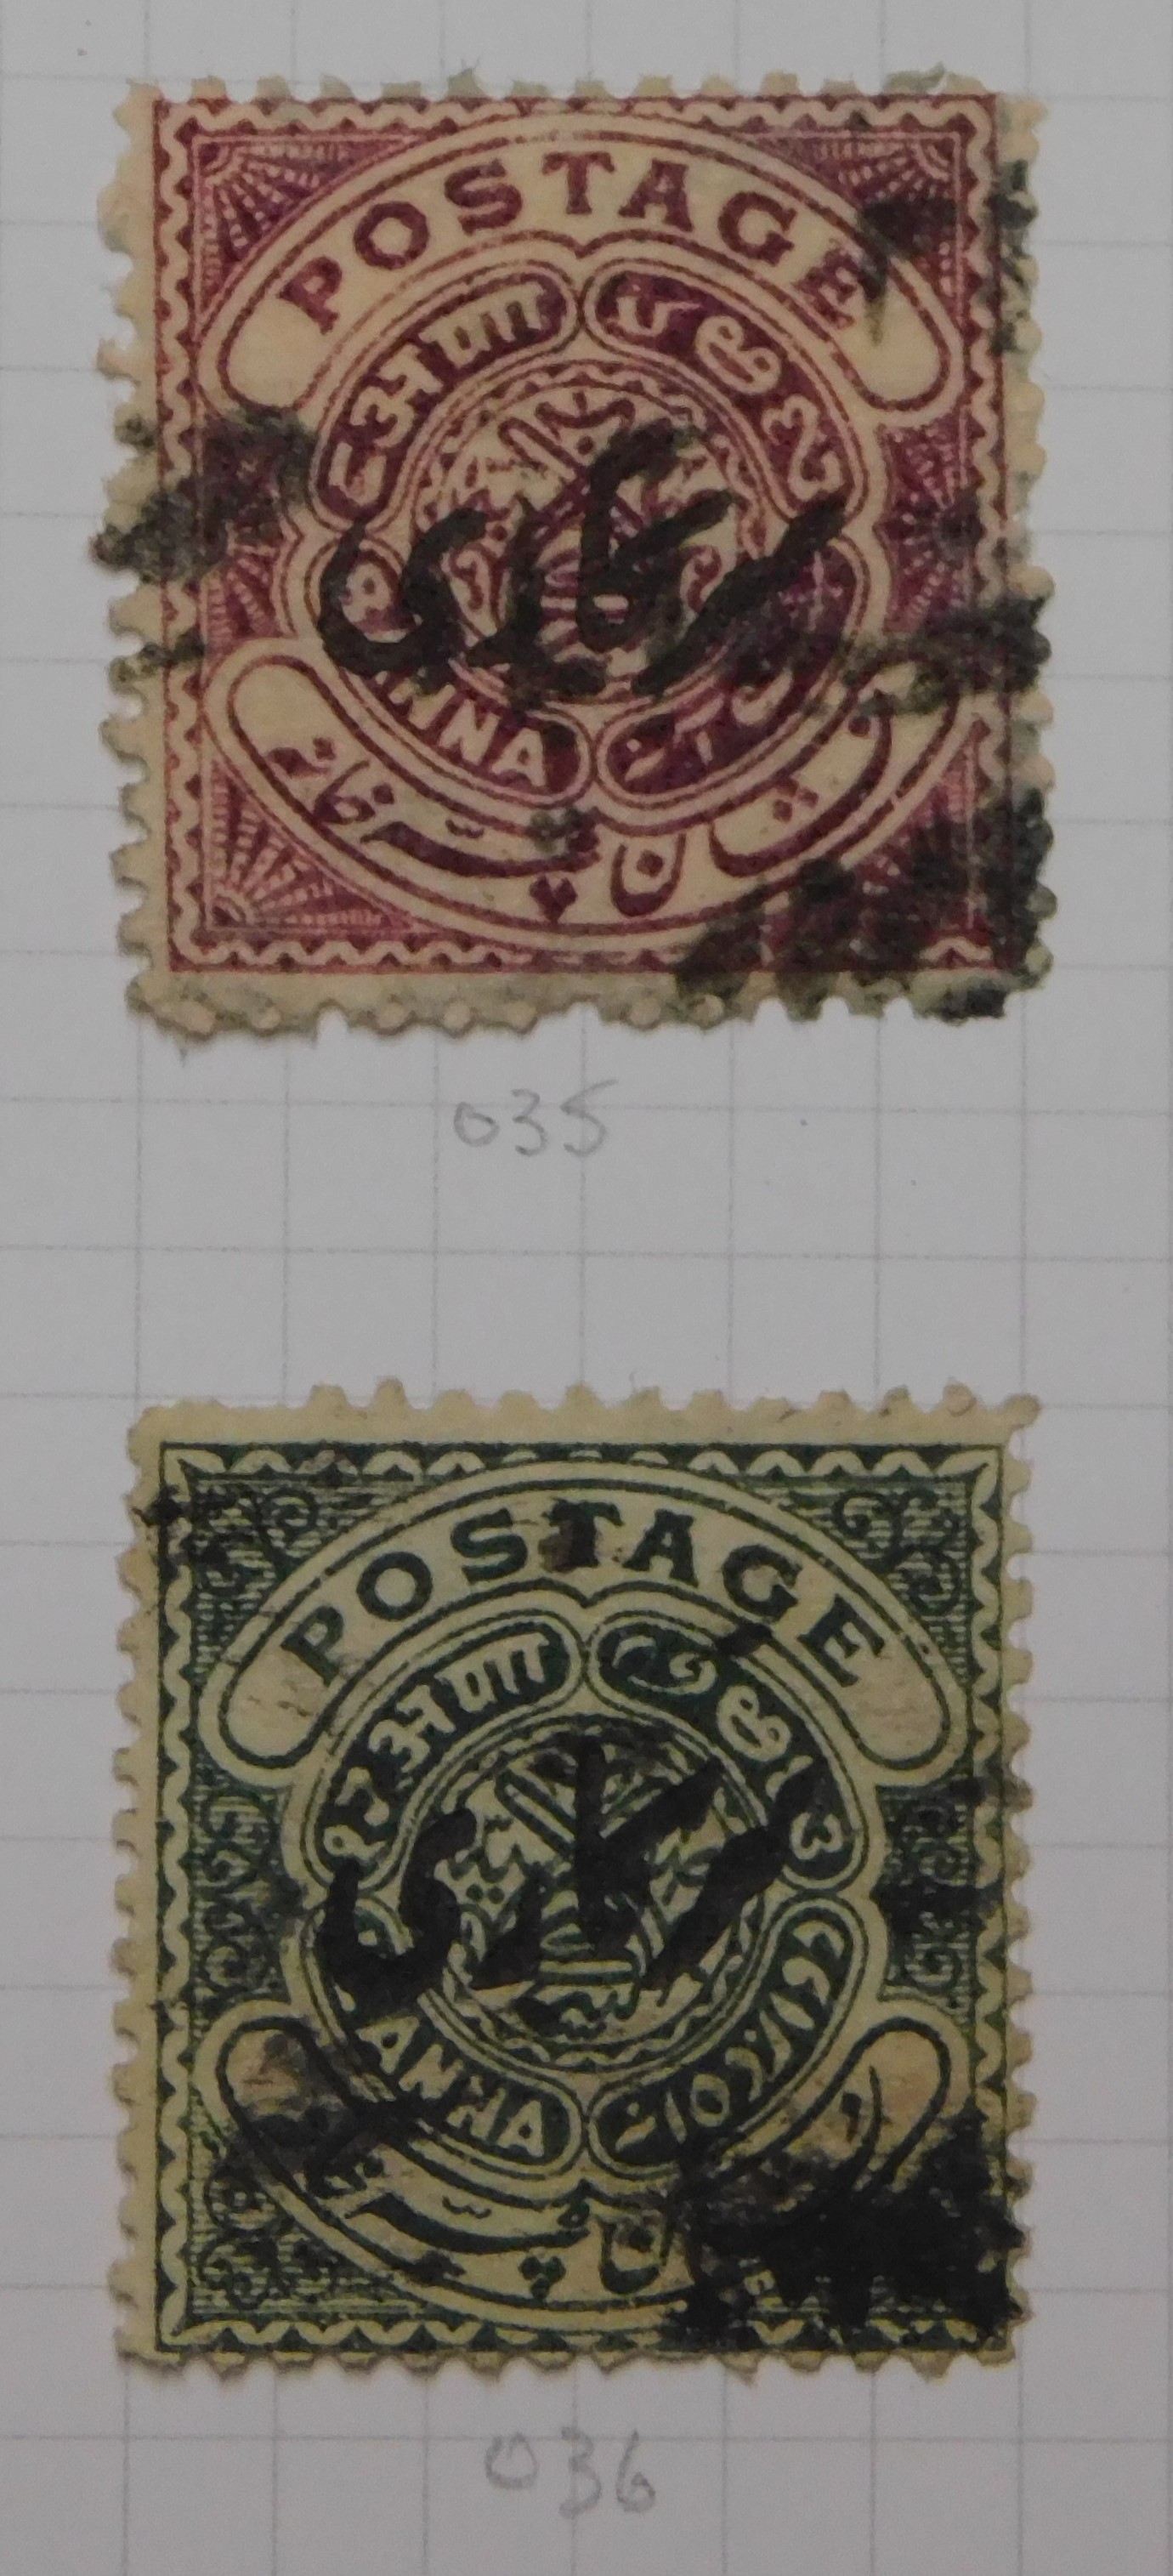 India (Hyderabad) Officials very fine used 1911-1912 035 to 039c, 038 P12.1/2 (Not catalogues) al 20 - Image 6 of 7